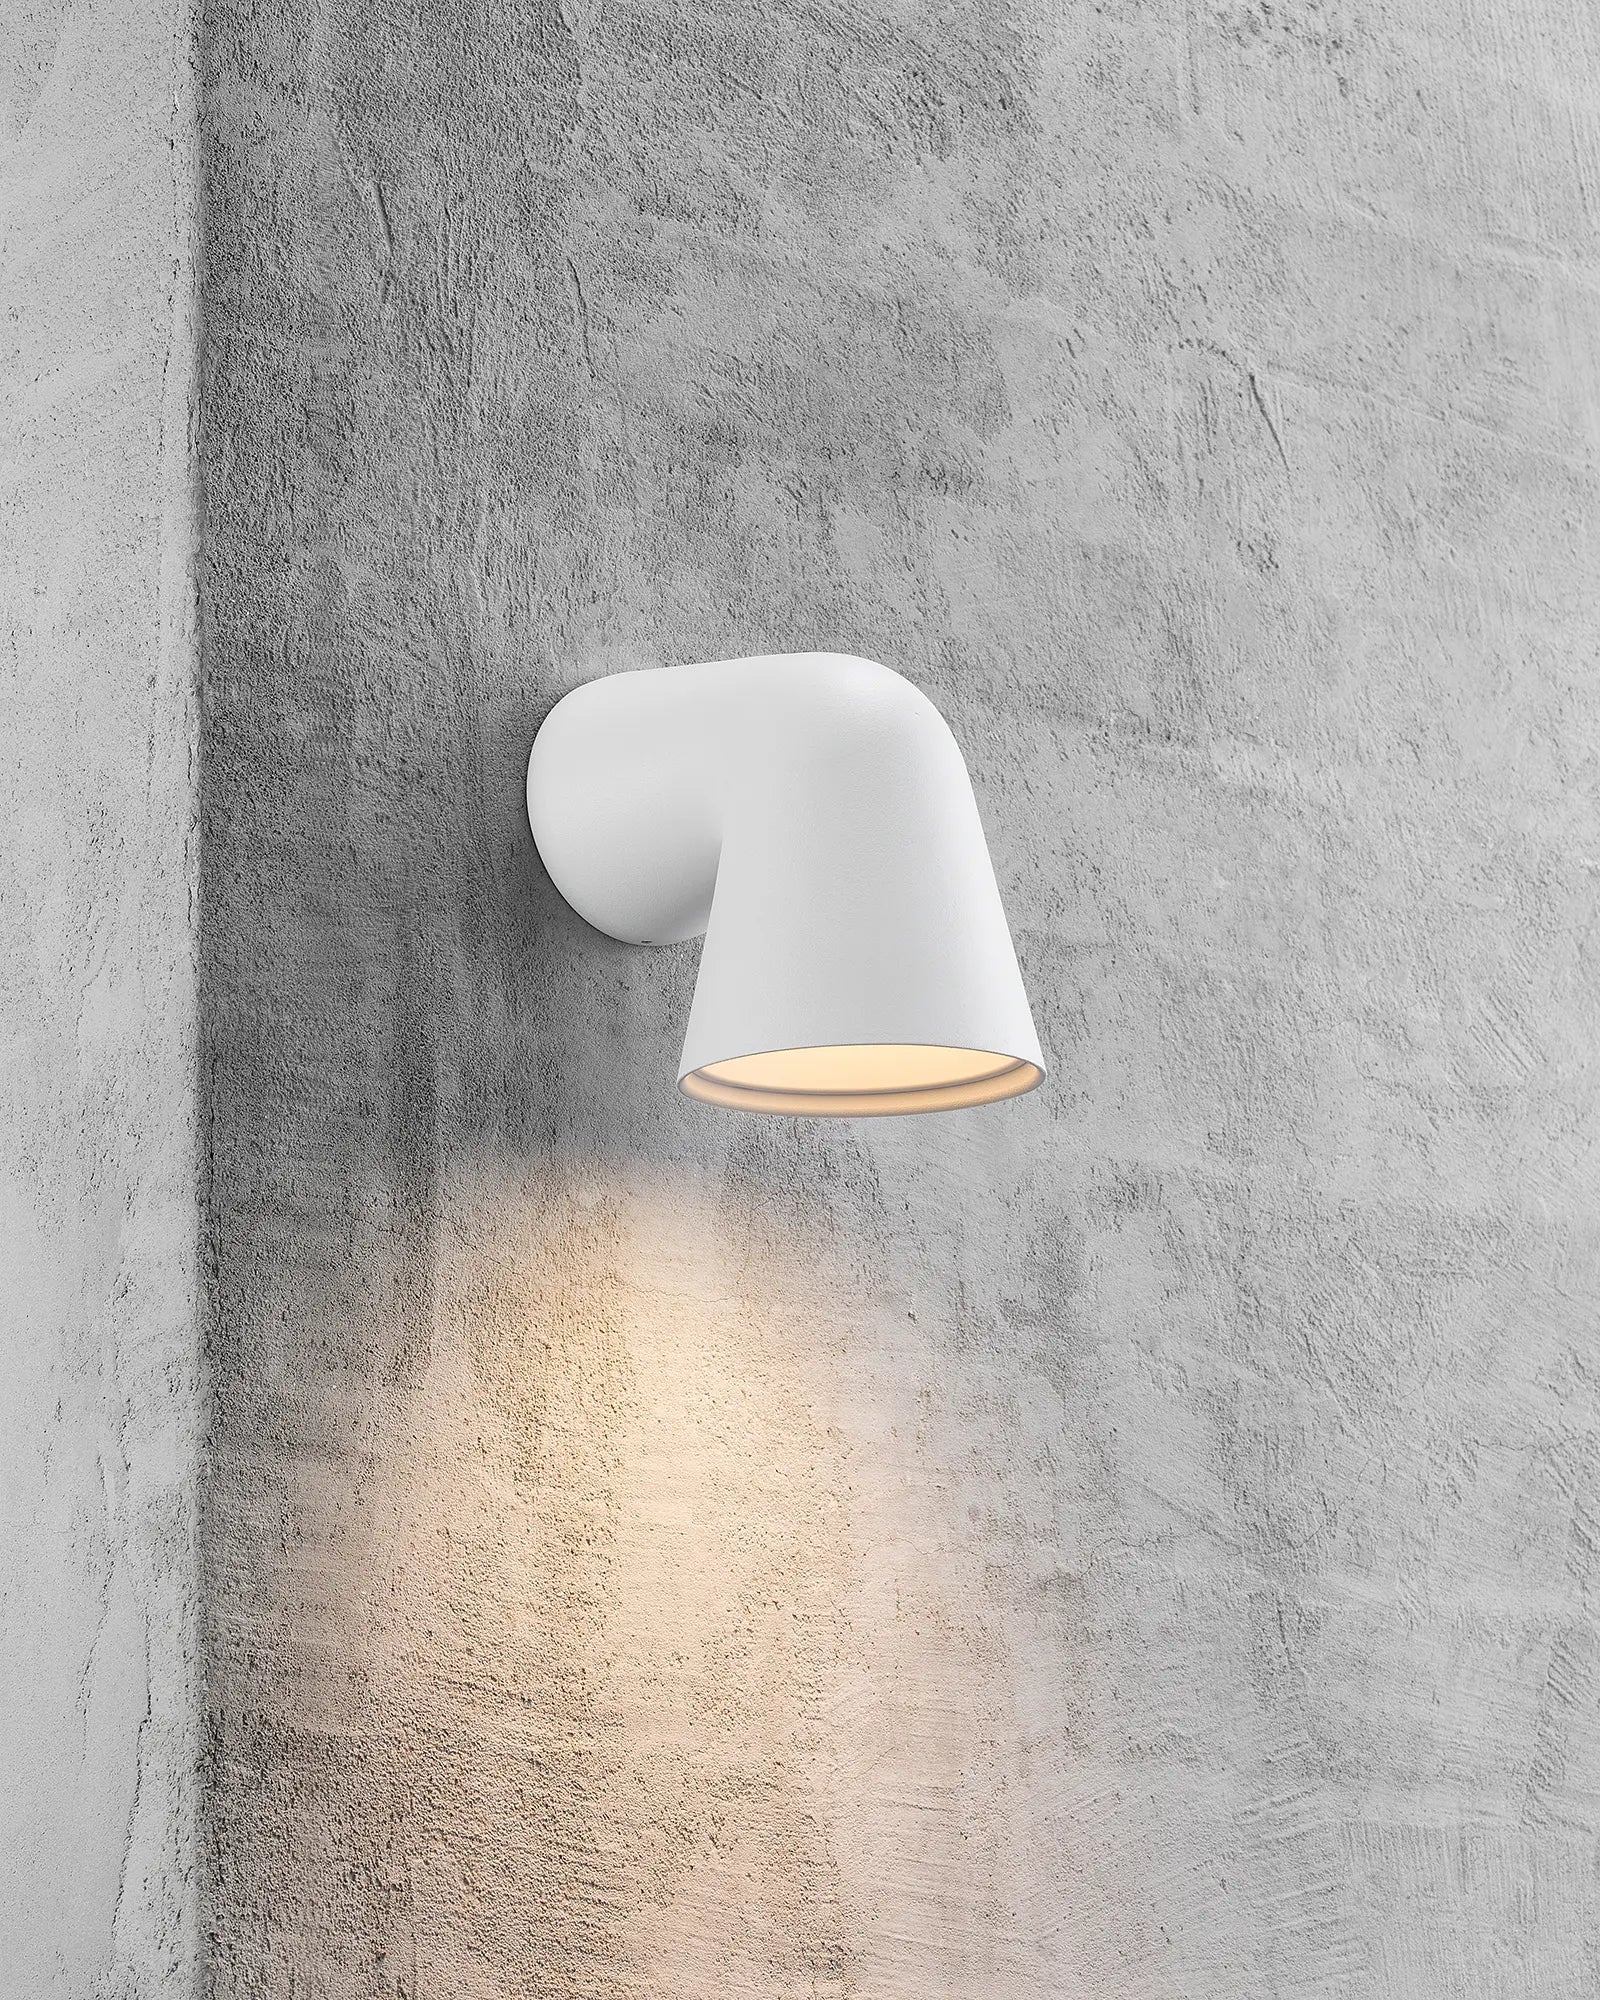 Front single Scandinavian outdoor light white on concrete wall